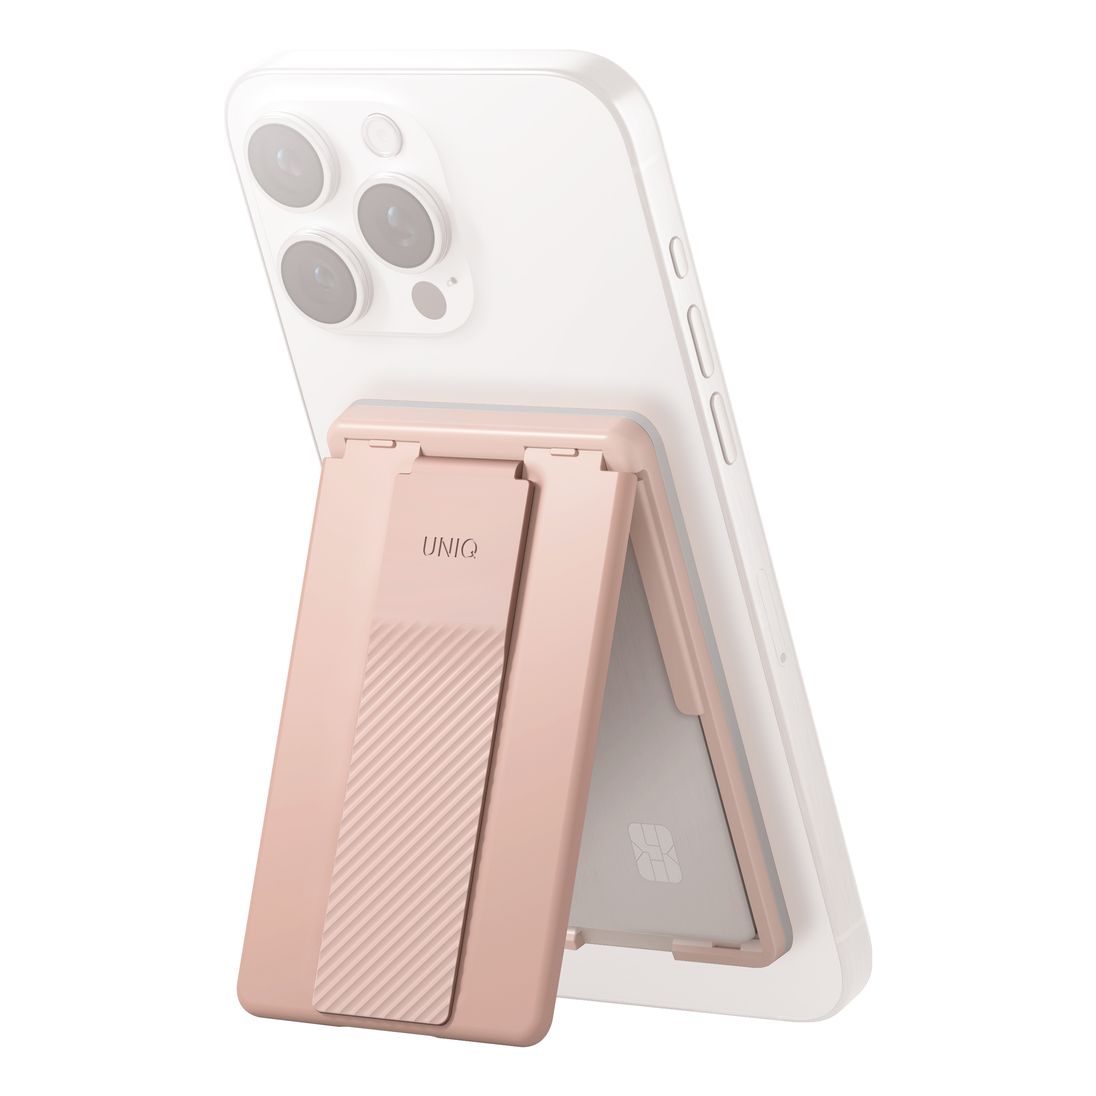 UNIQ Heldro ID Magnetic Card Holder With Grip-Band And Stand - Blush